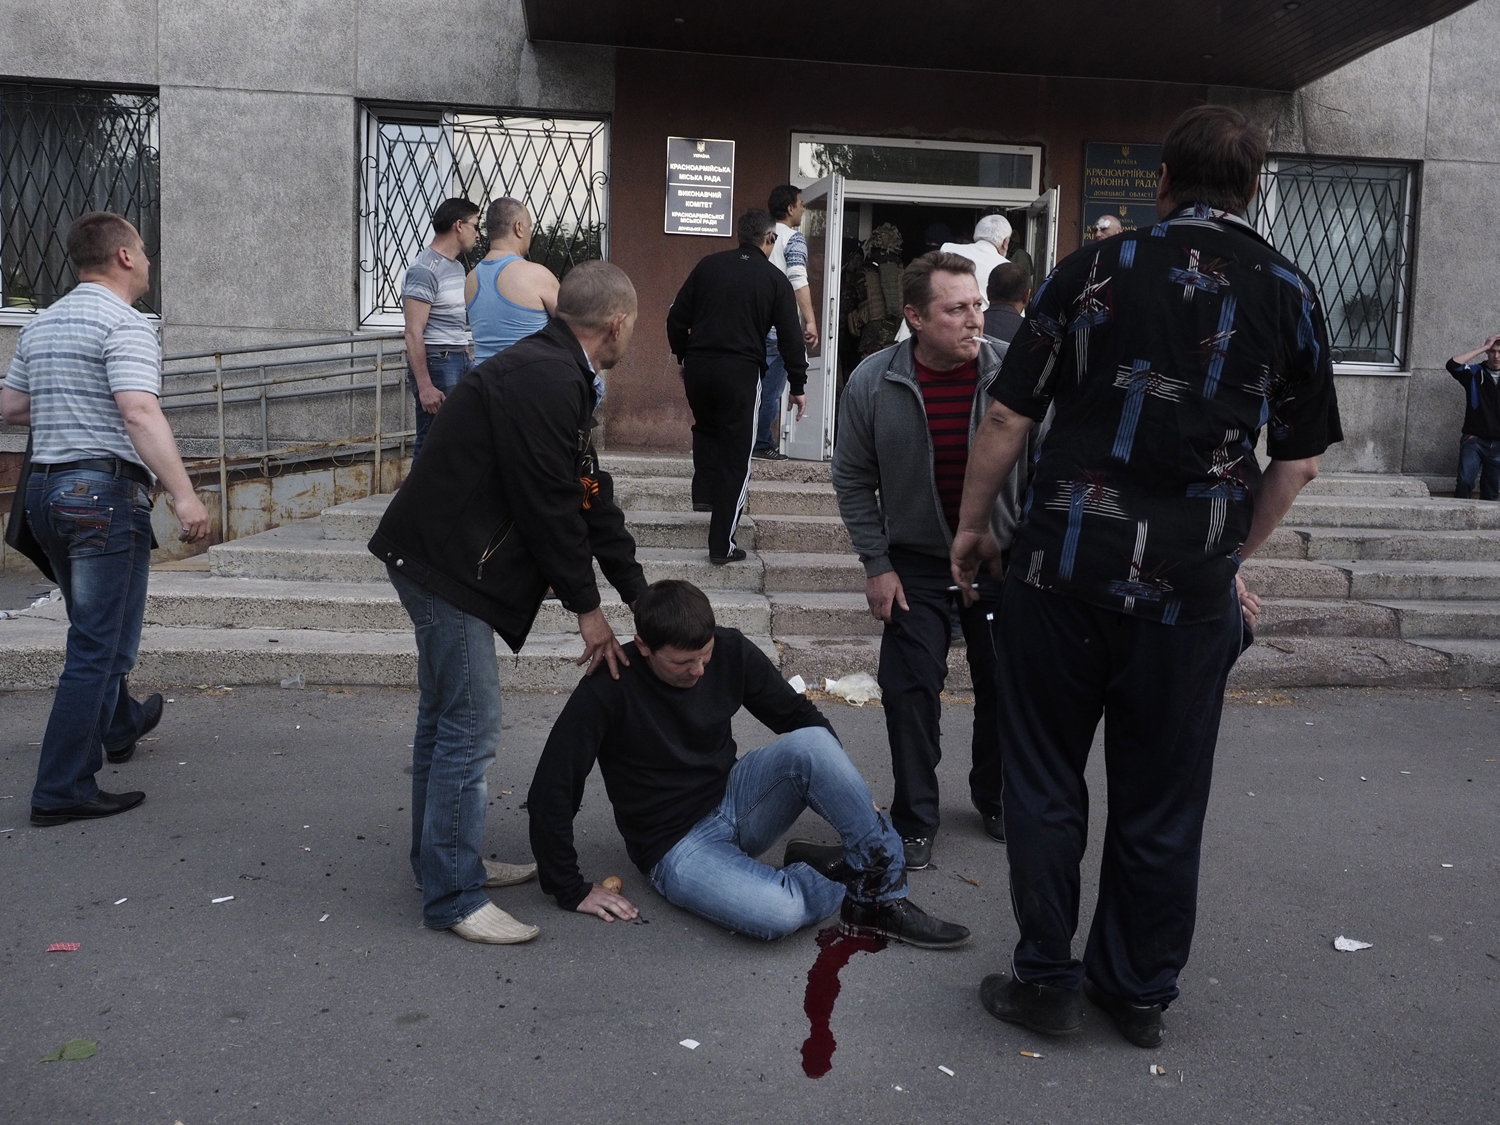 May 11, 2014. A man sits on the ground just moments after being shot in the leg by armed guards.